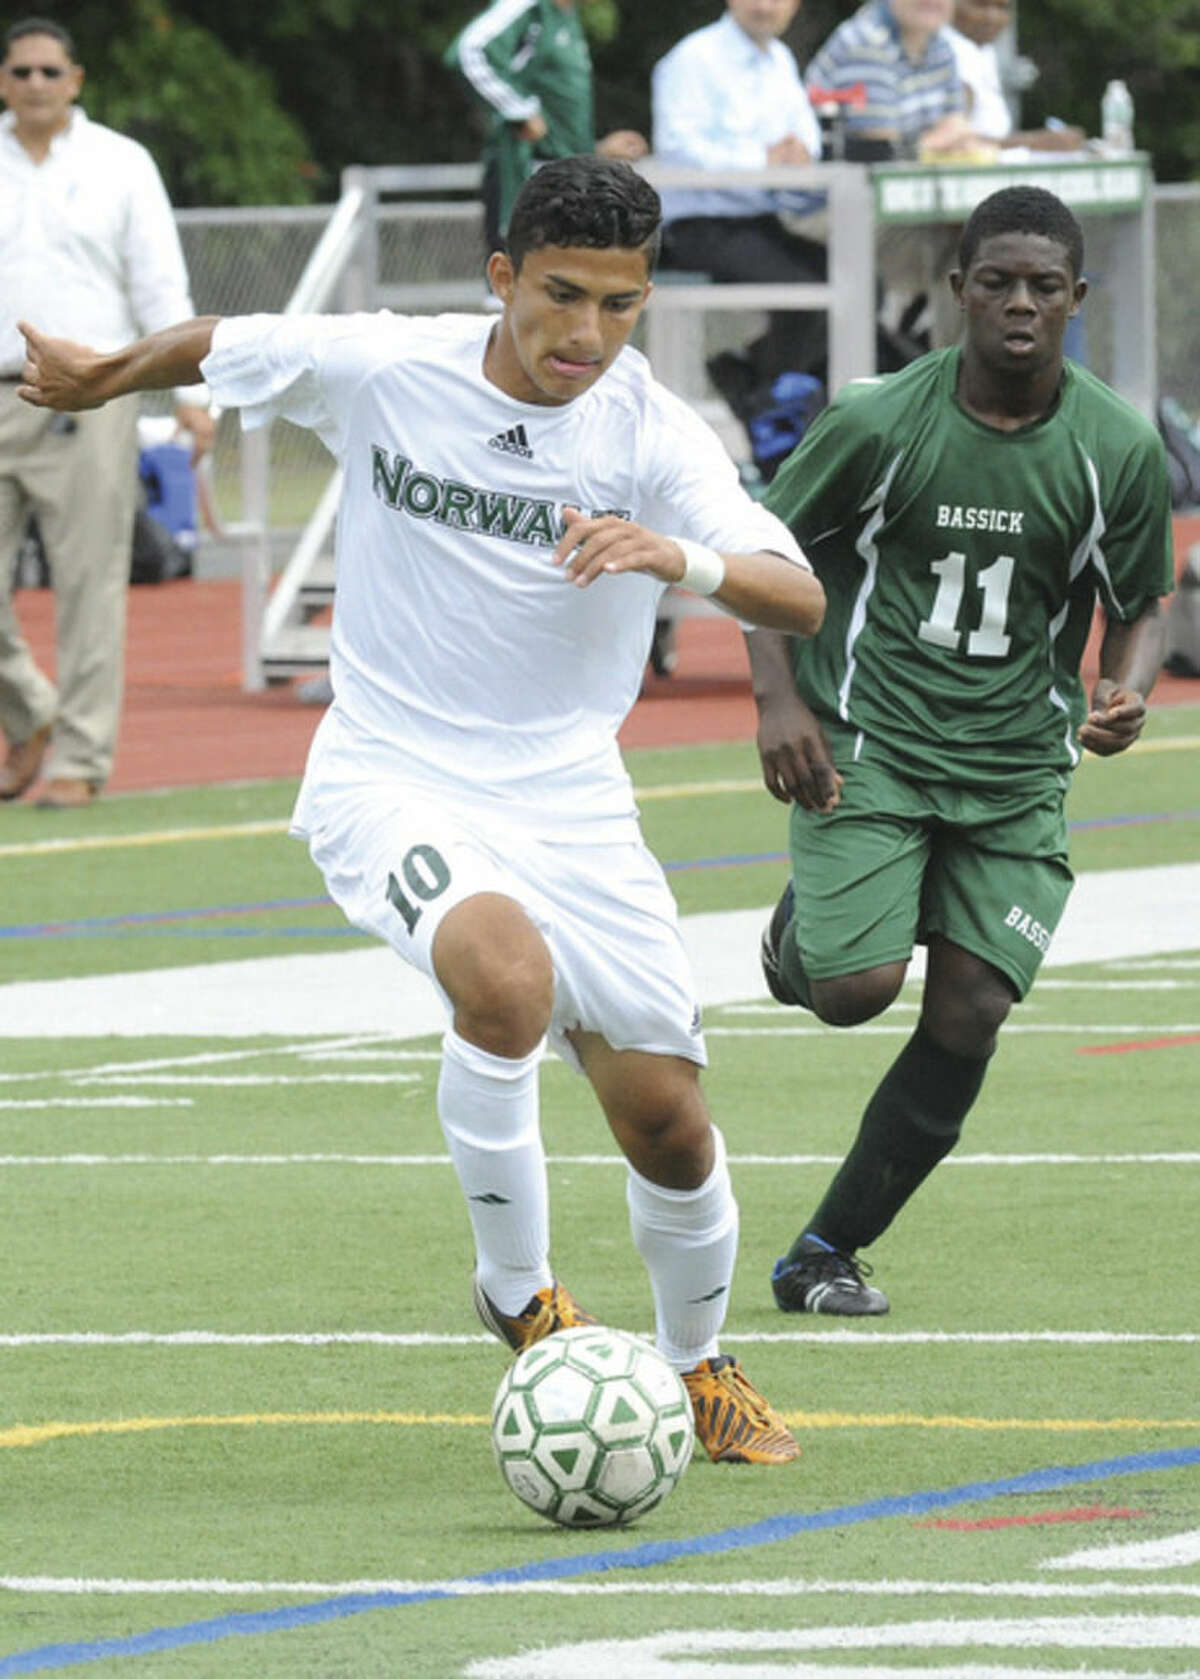 Hour photo/Matthew Vinci Norwalk's Patrick Barrantes, front, dribbles past Bassick's Simon McIntyre during Tuesday's game at Norwalk High. Barrantes scored three first half goals to help the Bears to their first win of the season.